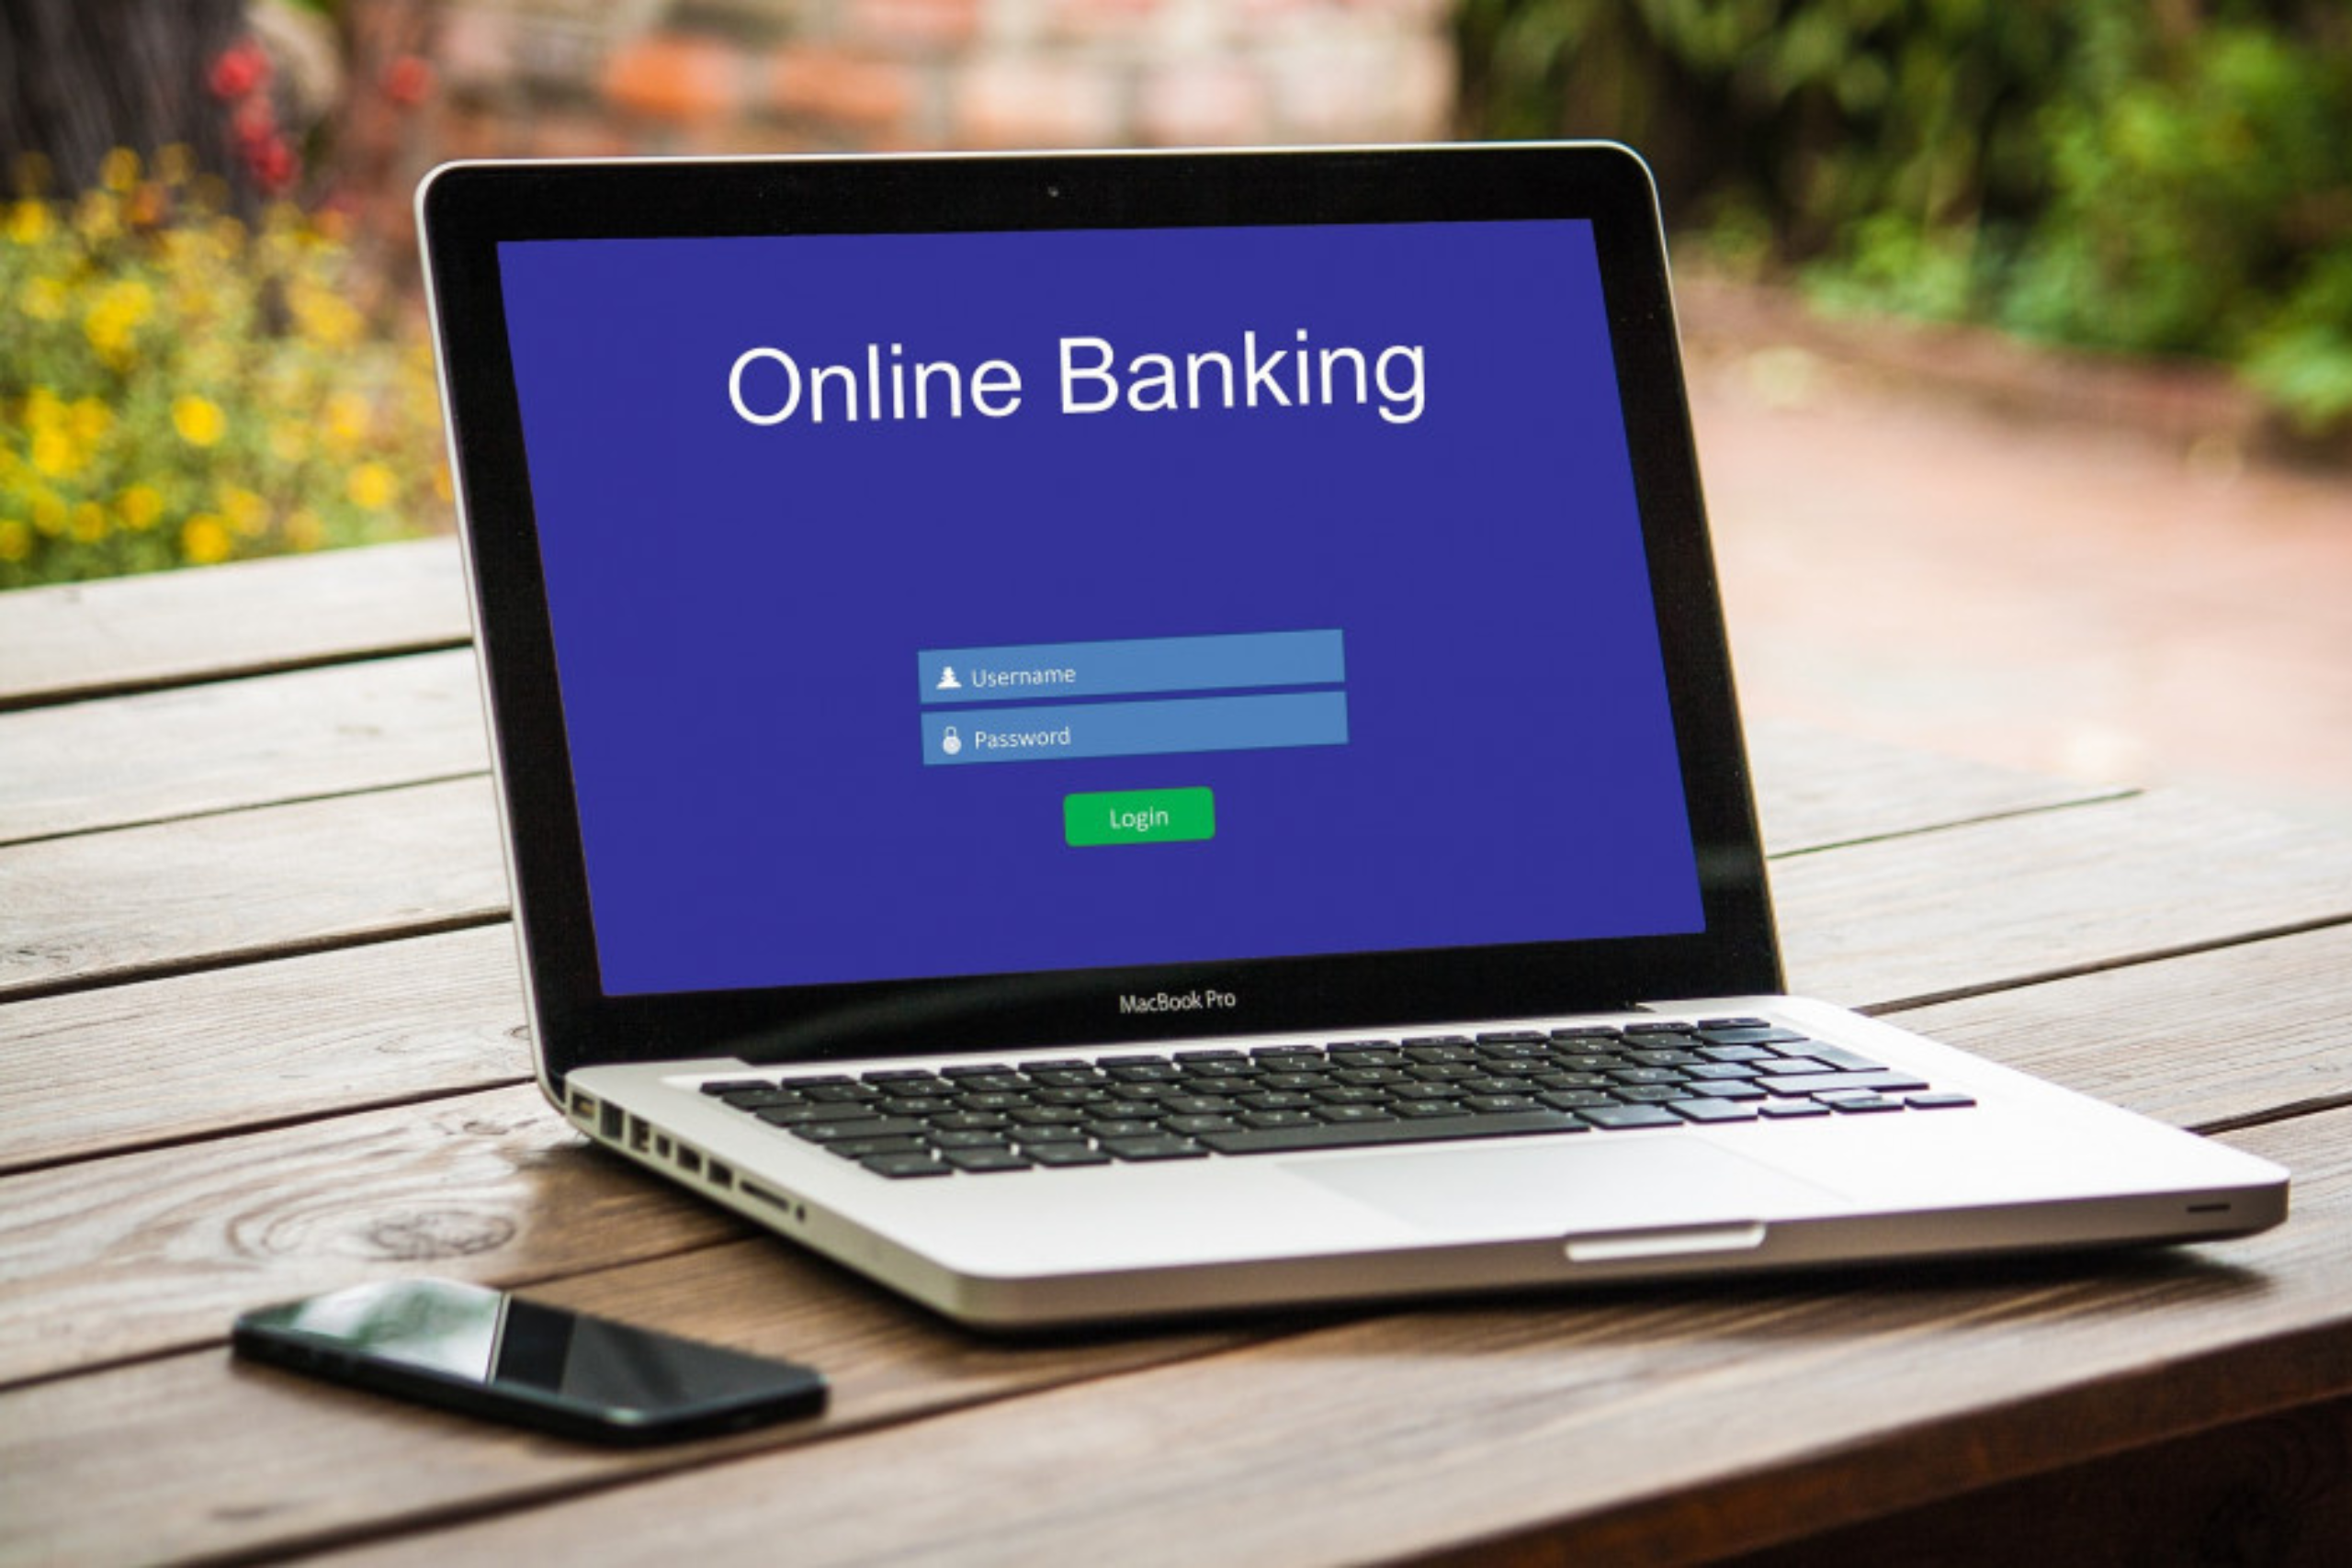 digital banking philippines, features of digital banking, ofw remittances, ofw work abroad, ofw investment opportunities, which bank may be used by ofw